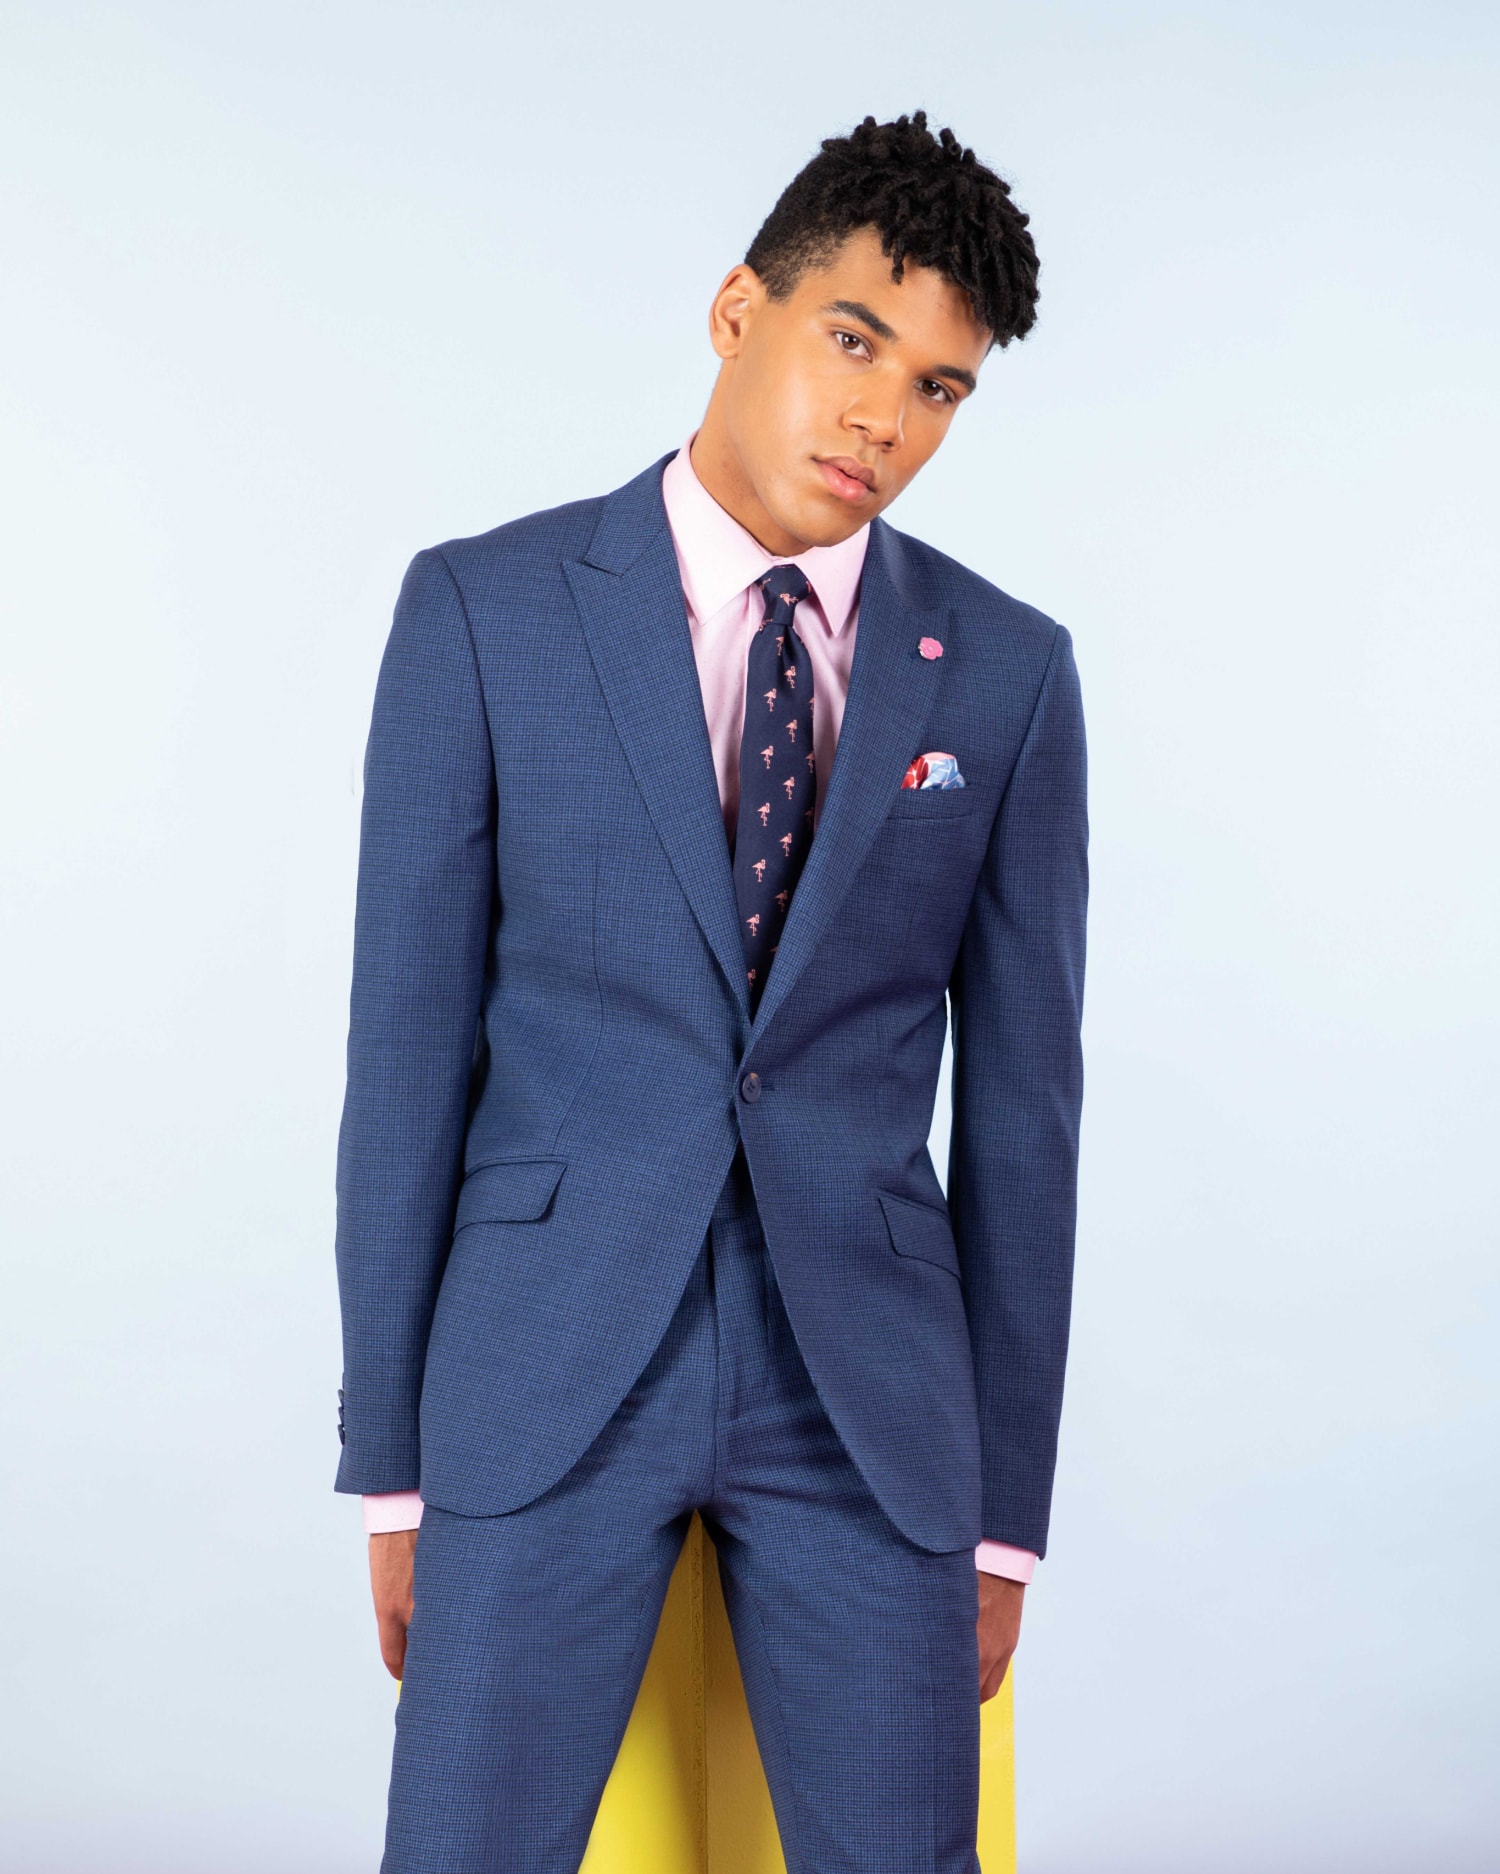 The Ultimate Wedding Suit and Attire for Men – StudioSuits